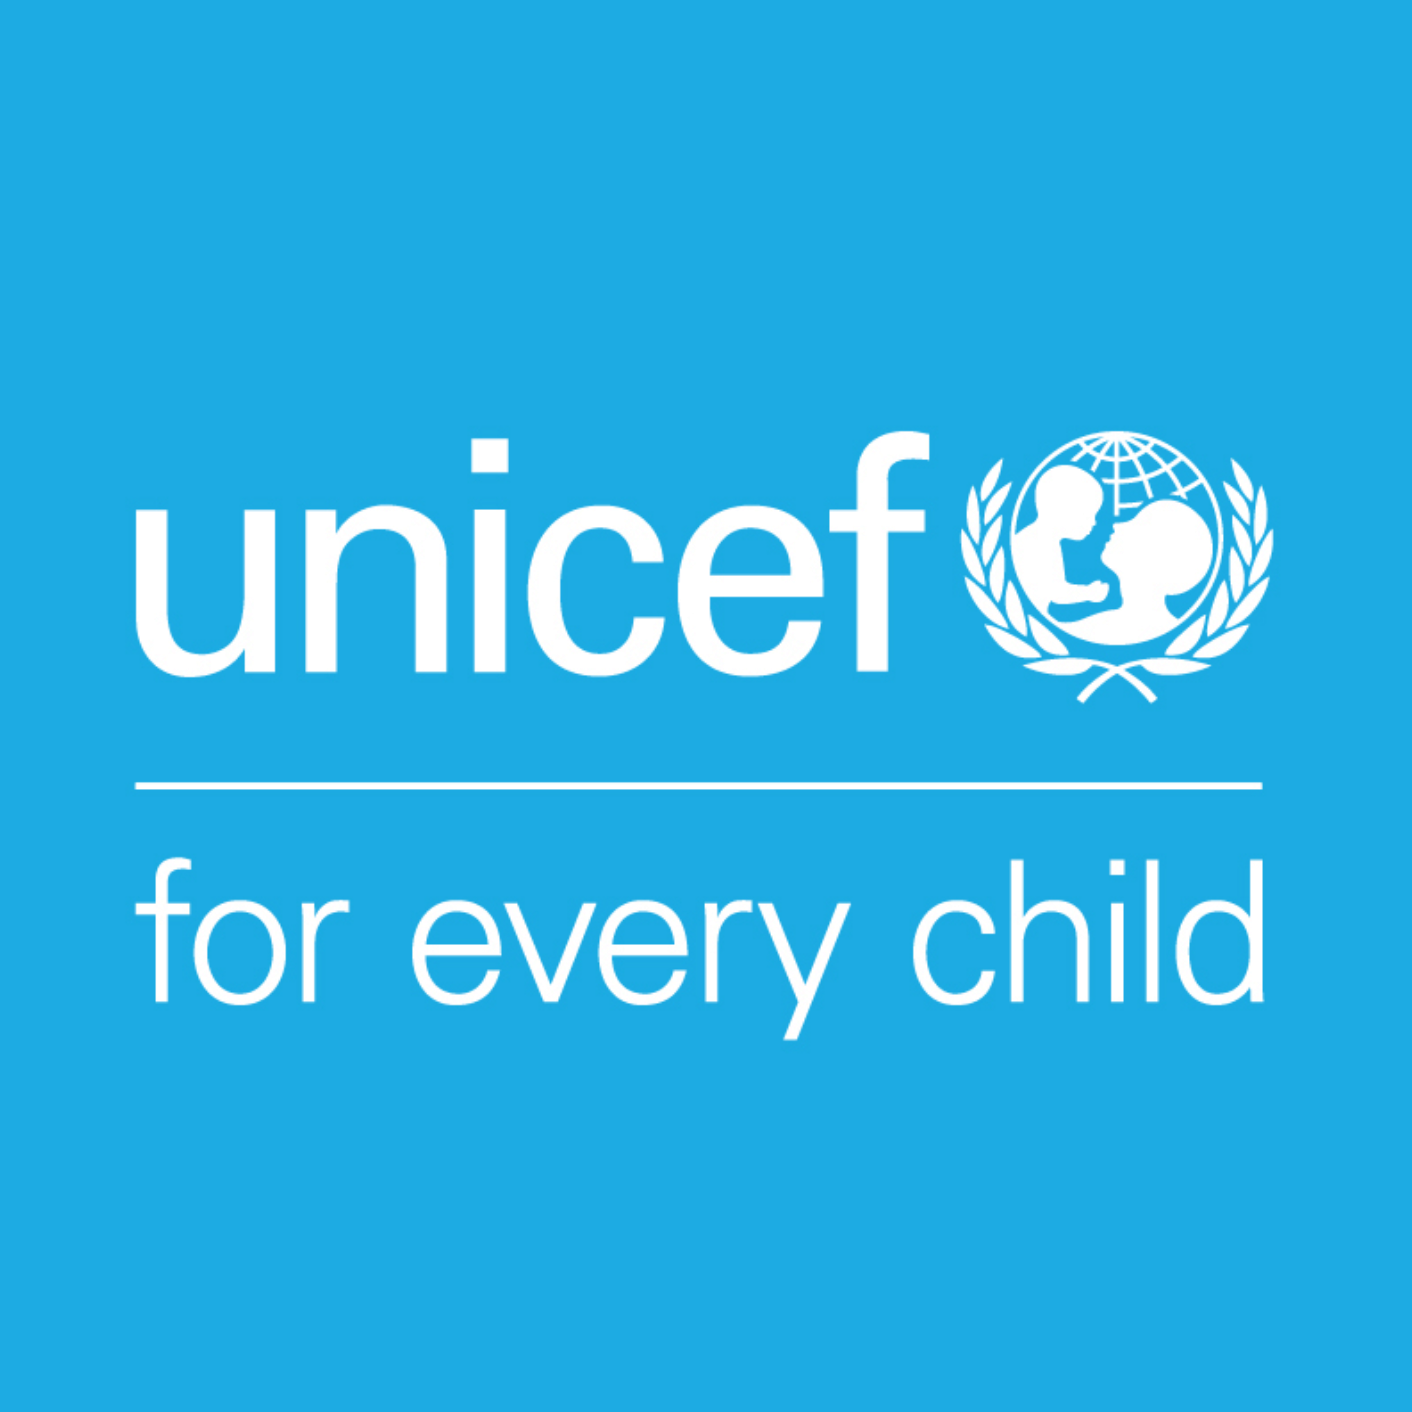 UNICEF Statement on making cities fit and safe for children